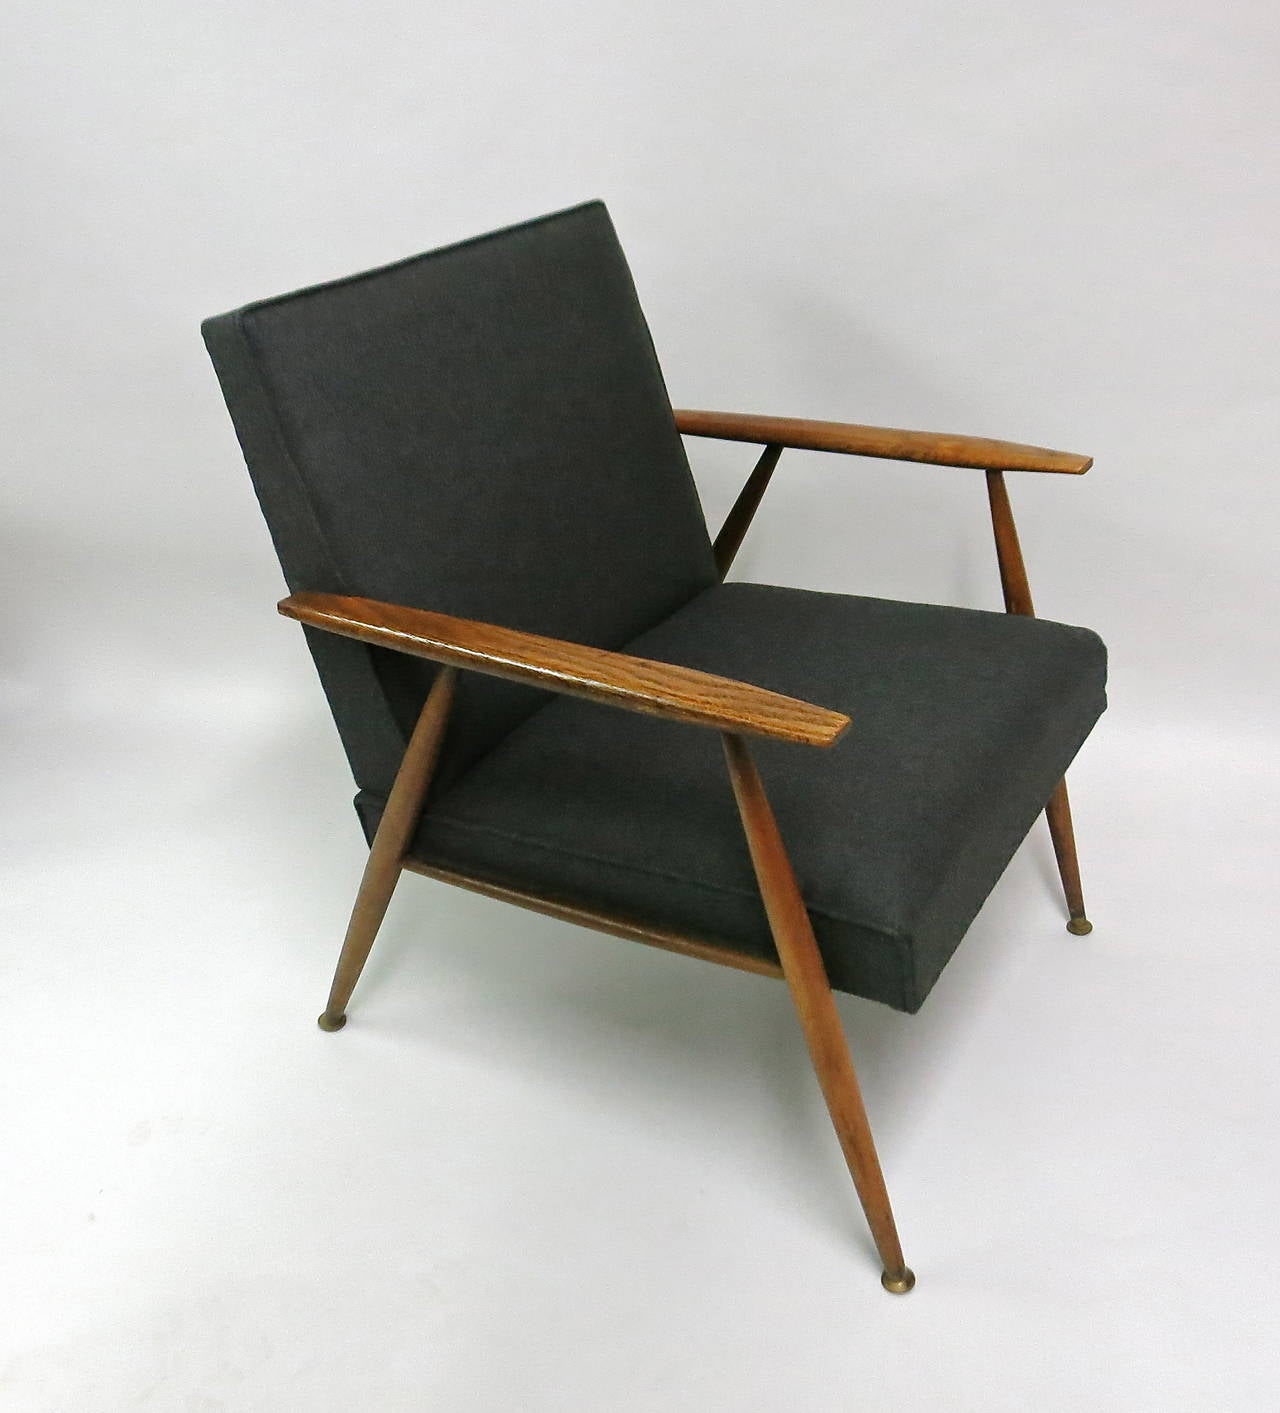 Pair of armchairs have a walnut frame with upholstered seat and back. The cushions are sewn in and recently done in a vintage grey wool fabric.
All four legs are tapered, top and bottom with a brass sabots on each. The sabot connects to an original